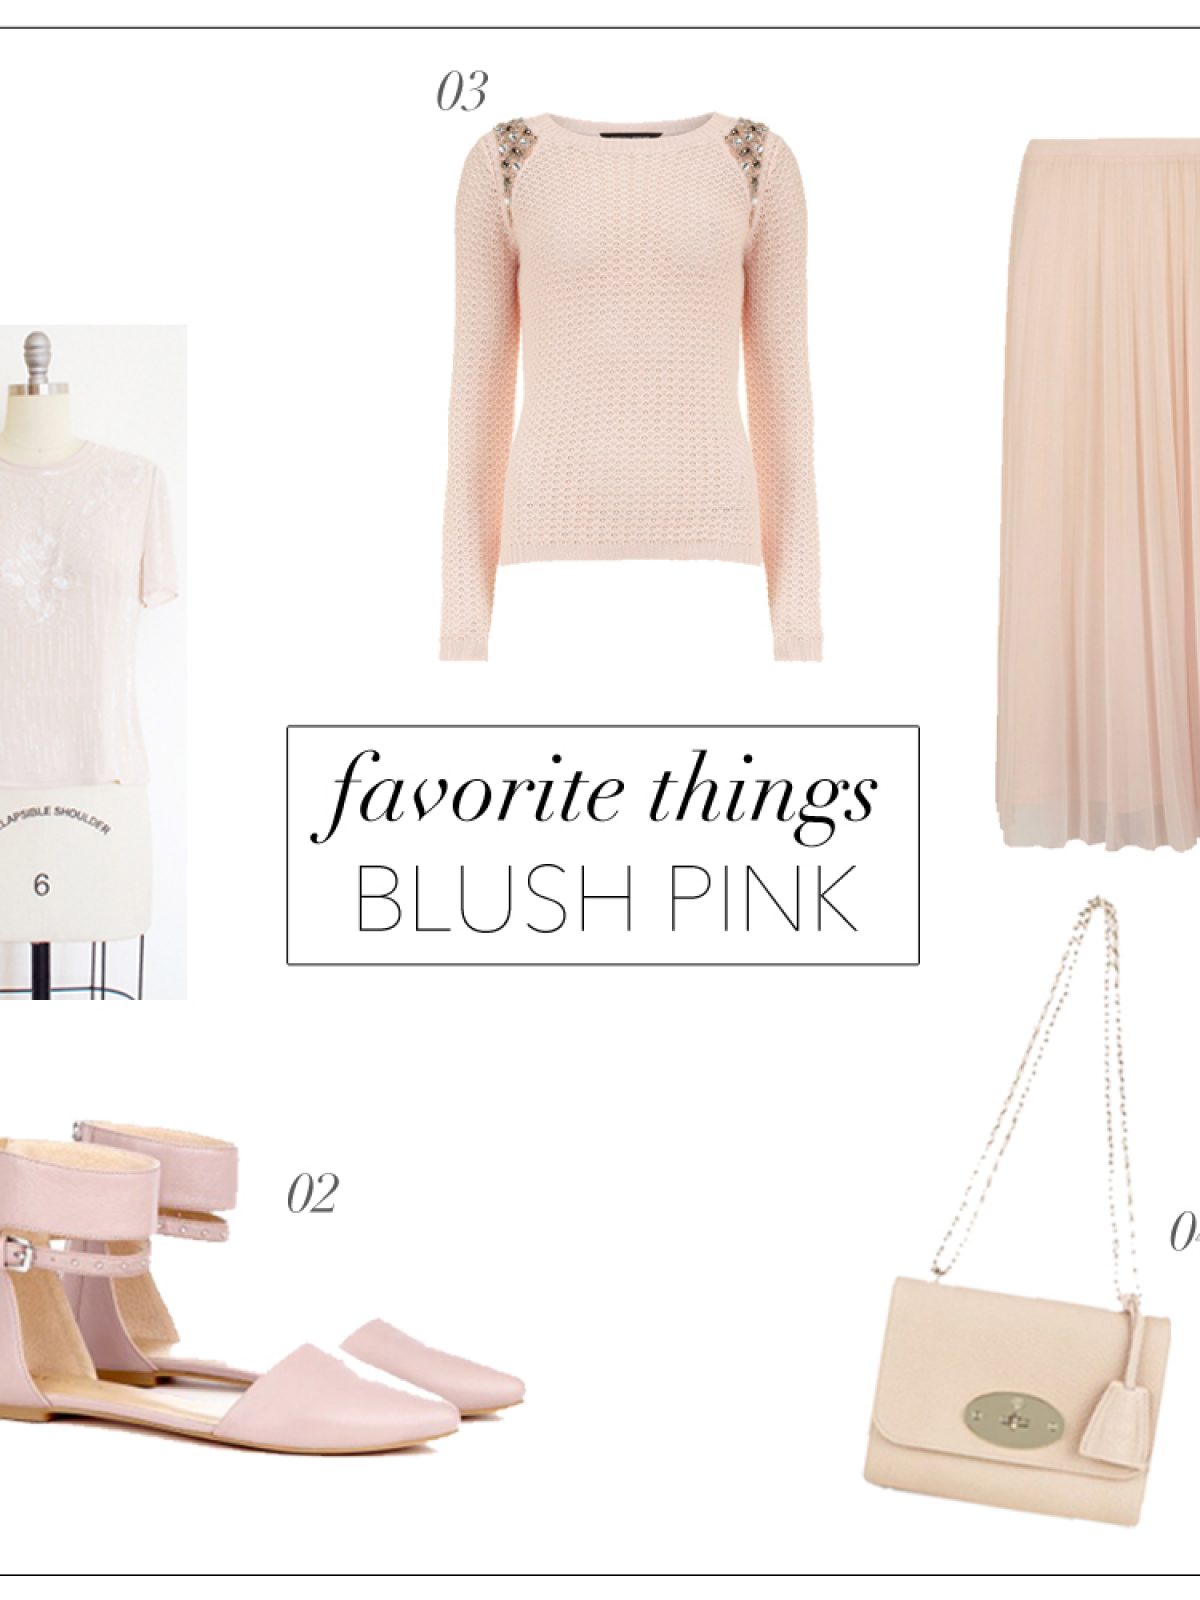 favorite things, blush pink, blush maxi skirt, blush flats, blush dorsay, blush bag, blush top, blush sweater, mulberry, millay vintage, sole society, dorothy perkins